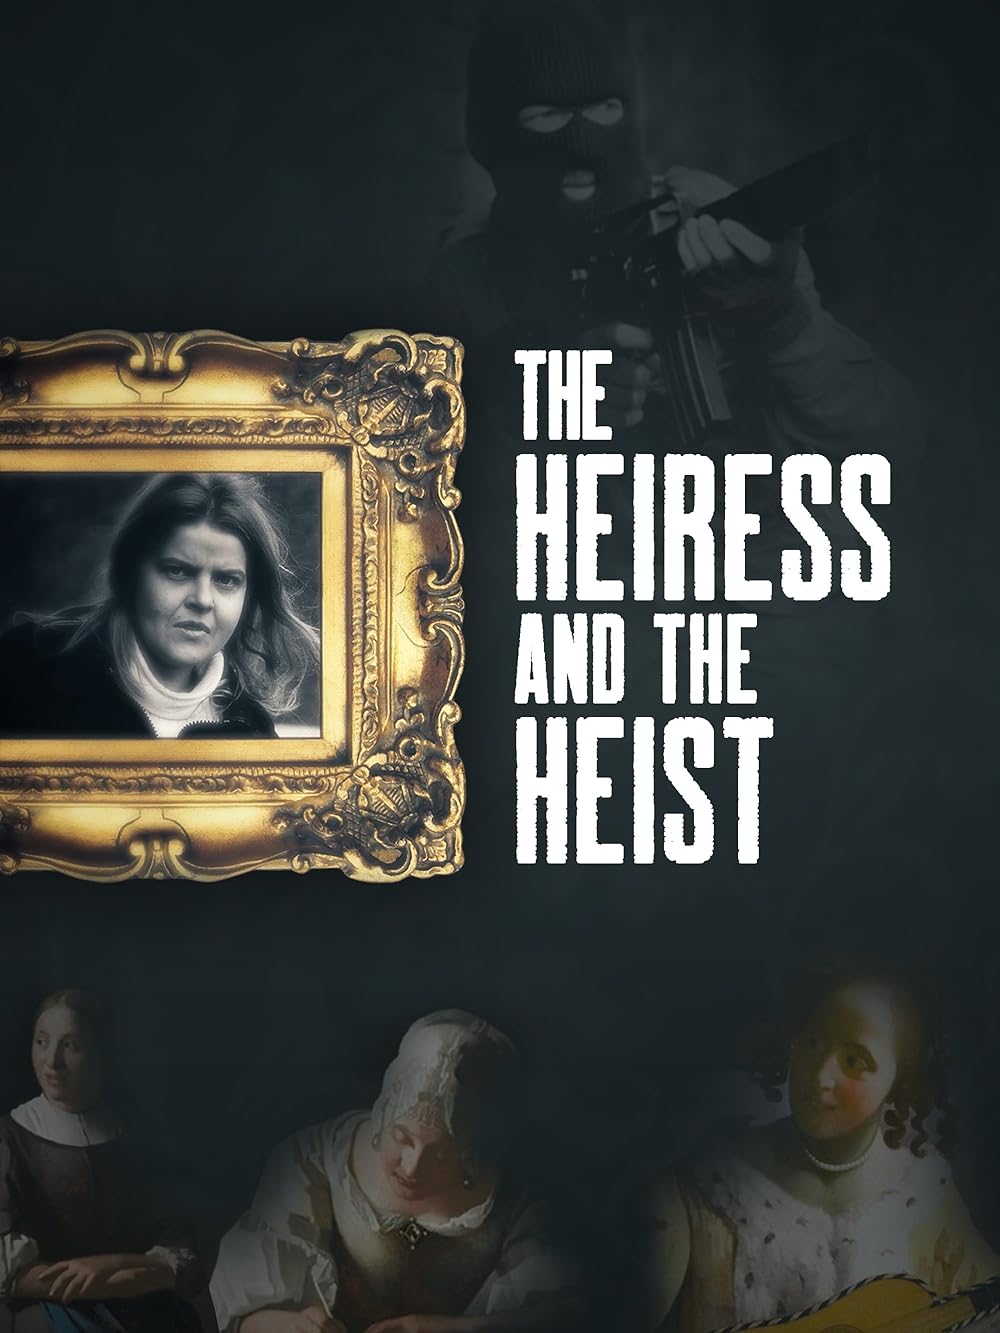 The Heiress and the Heist